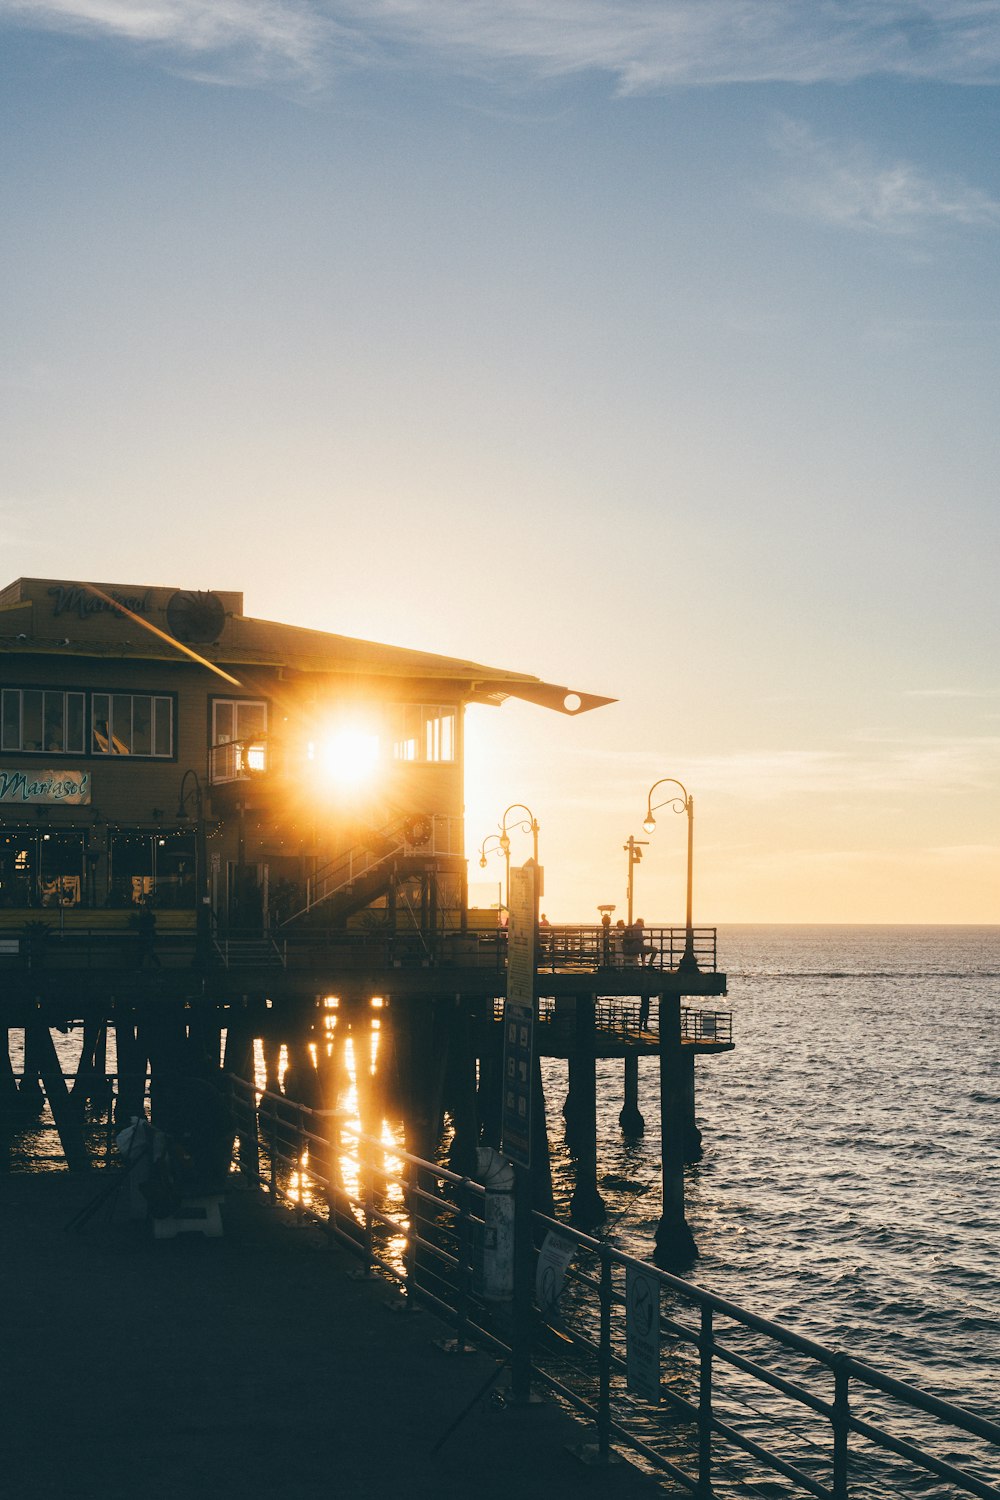 the sun is setting on a pier by the ocean